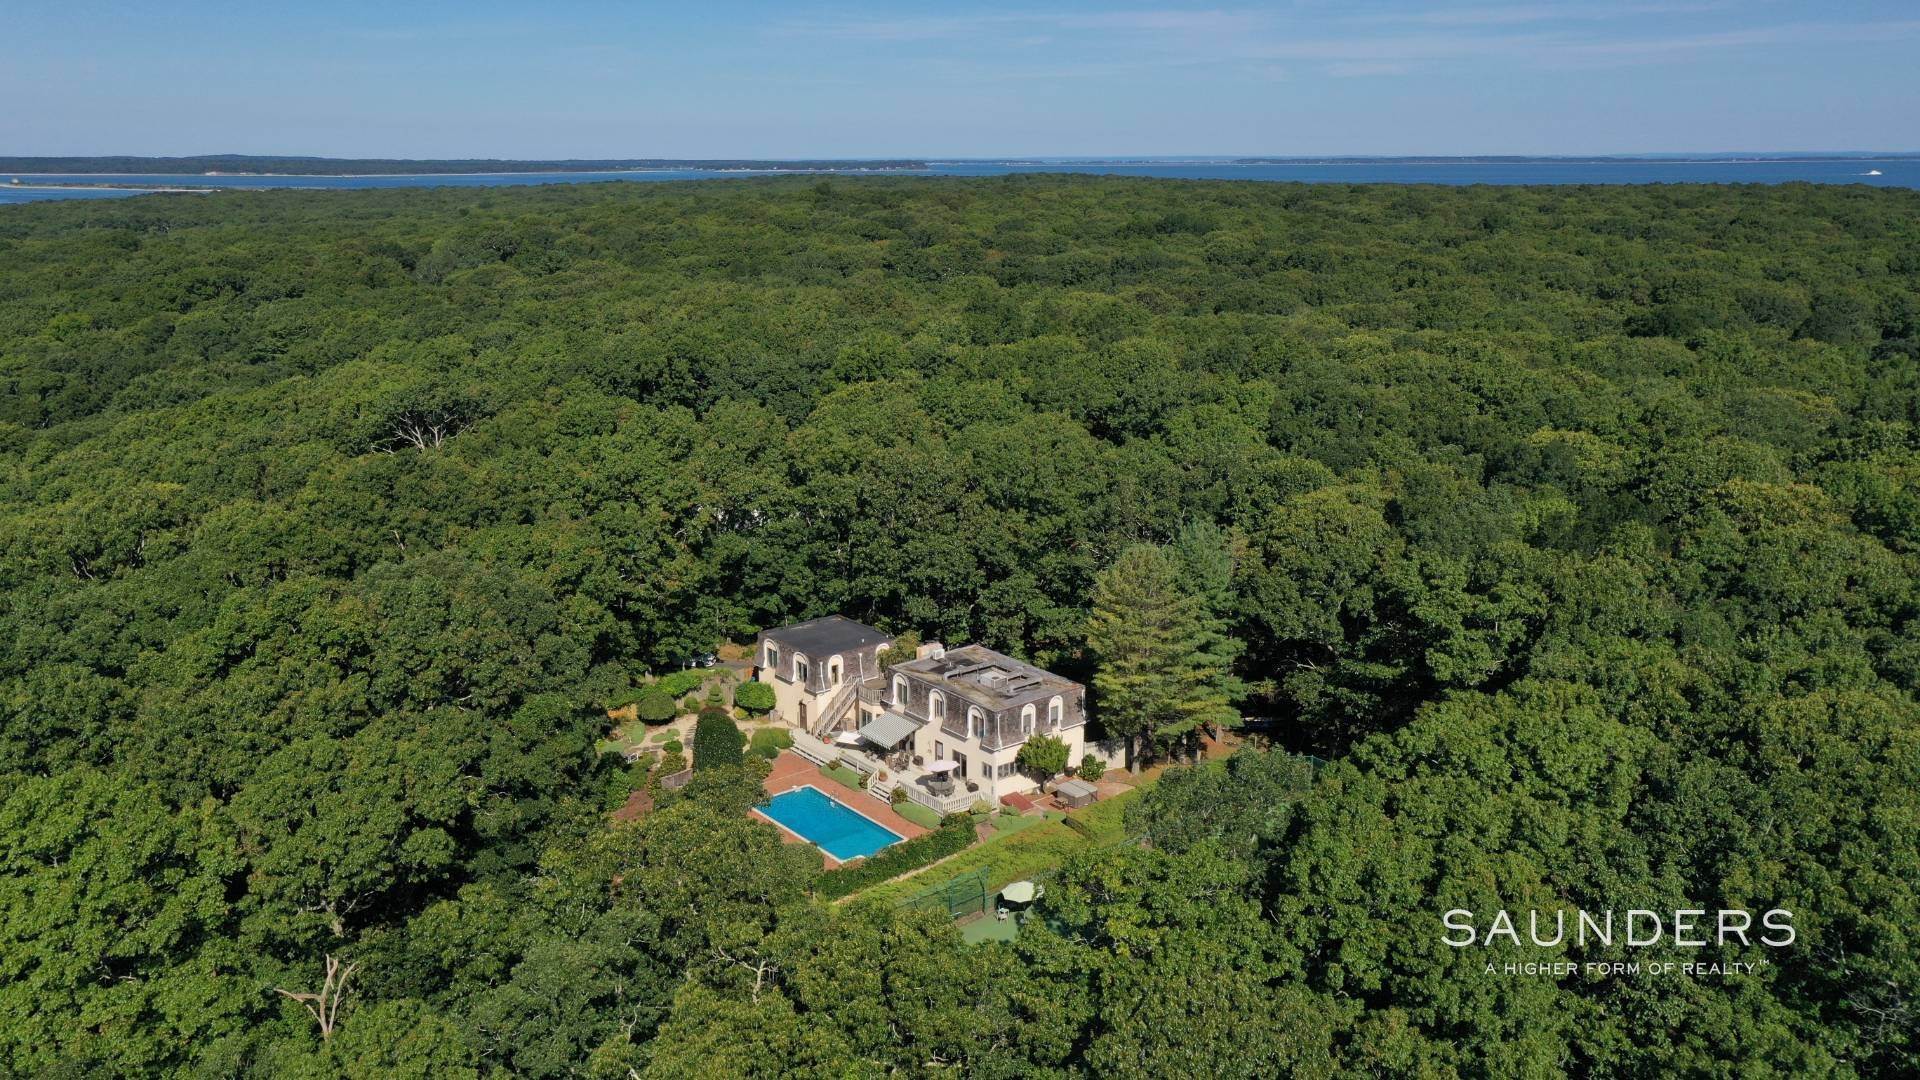 Single Family Homes for Sale at East Hampton Privacy With Tennis 24 Bearing East Road, East Hampton, NY 11937